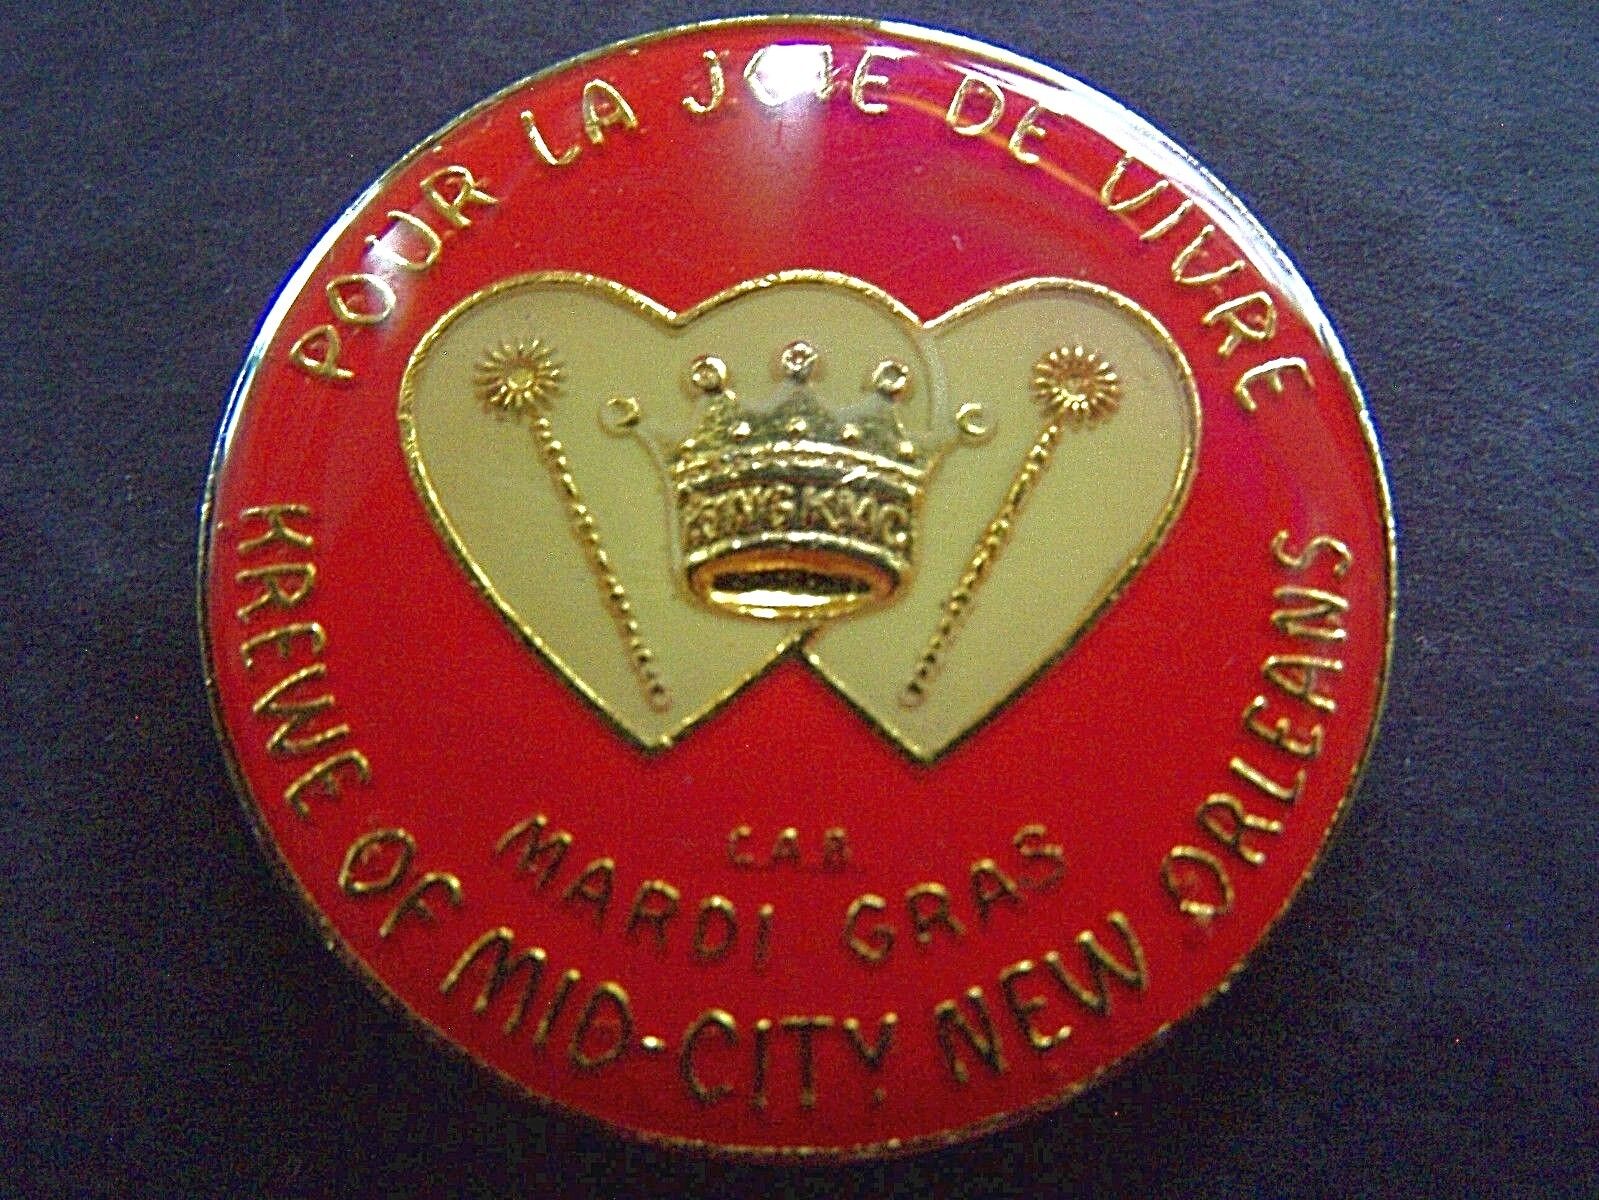 1981 Mid-City LANGUAGE OF THE FLOWERS Multi-Color Mardi Gras Doubloon